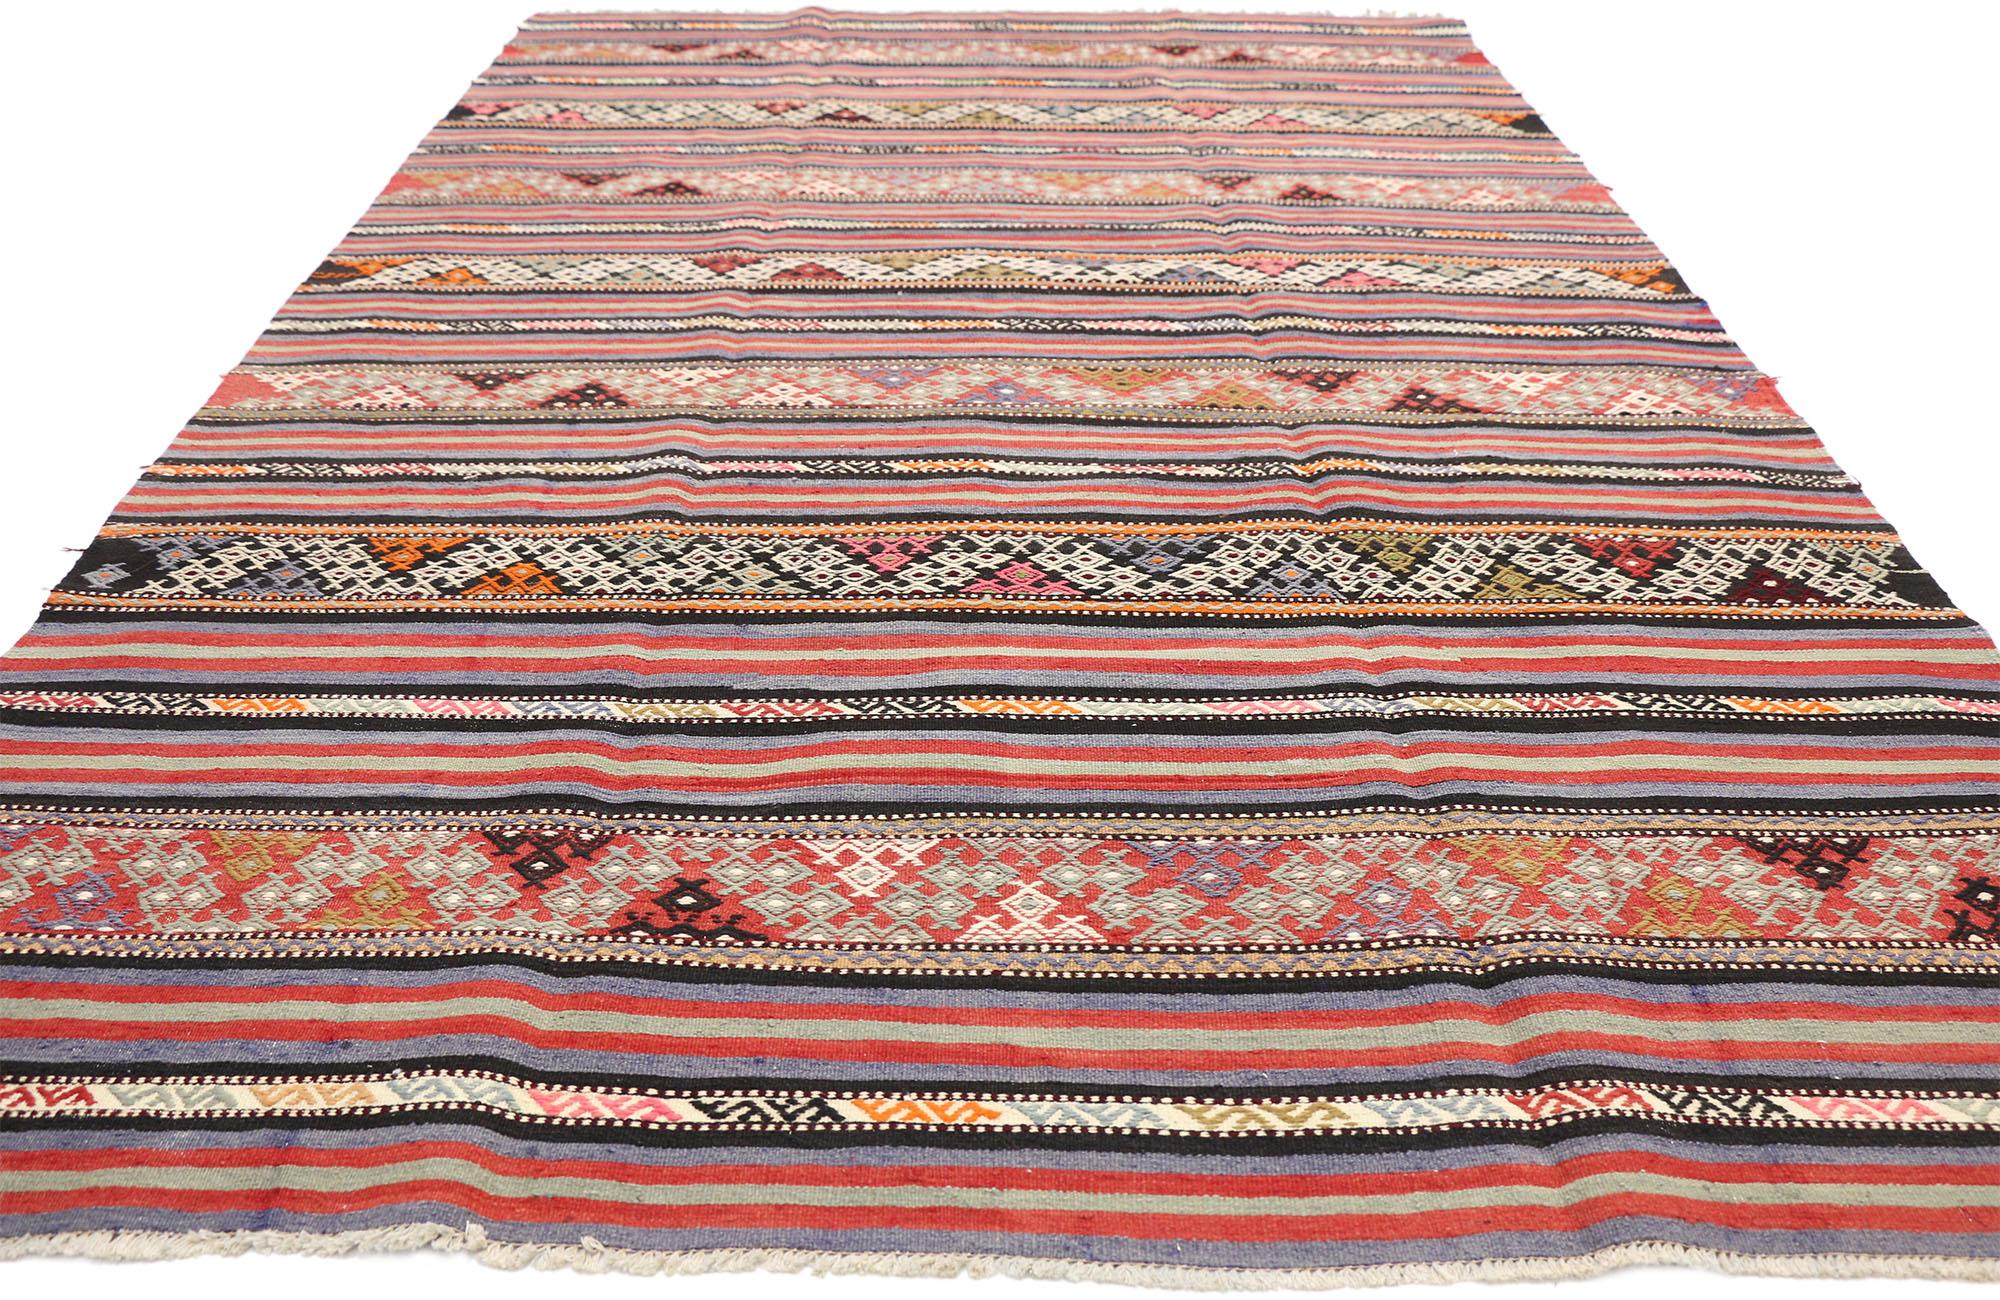 Hand-Woven Vintage Turkish Striped Kilim Rug with Modern Boho Chic Tribal Style For Sale